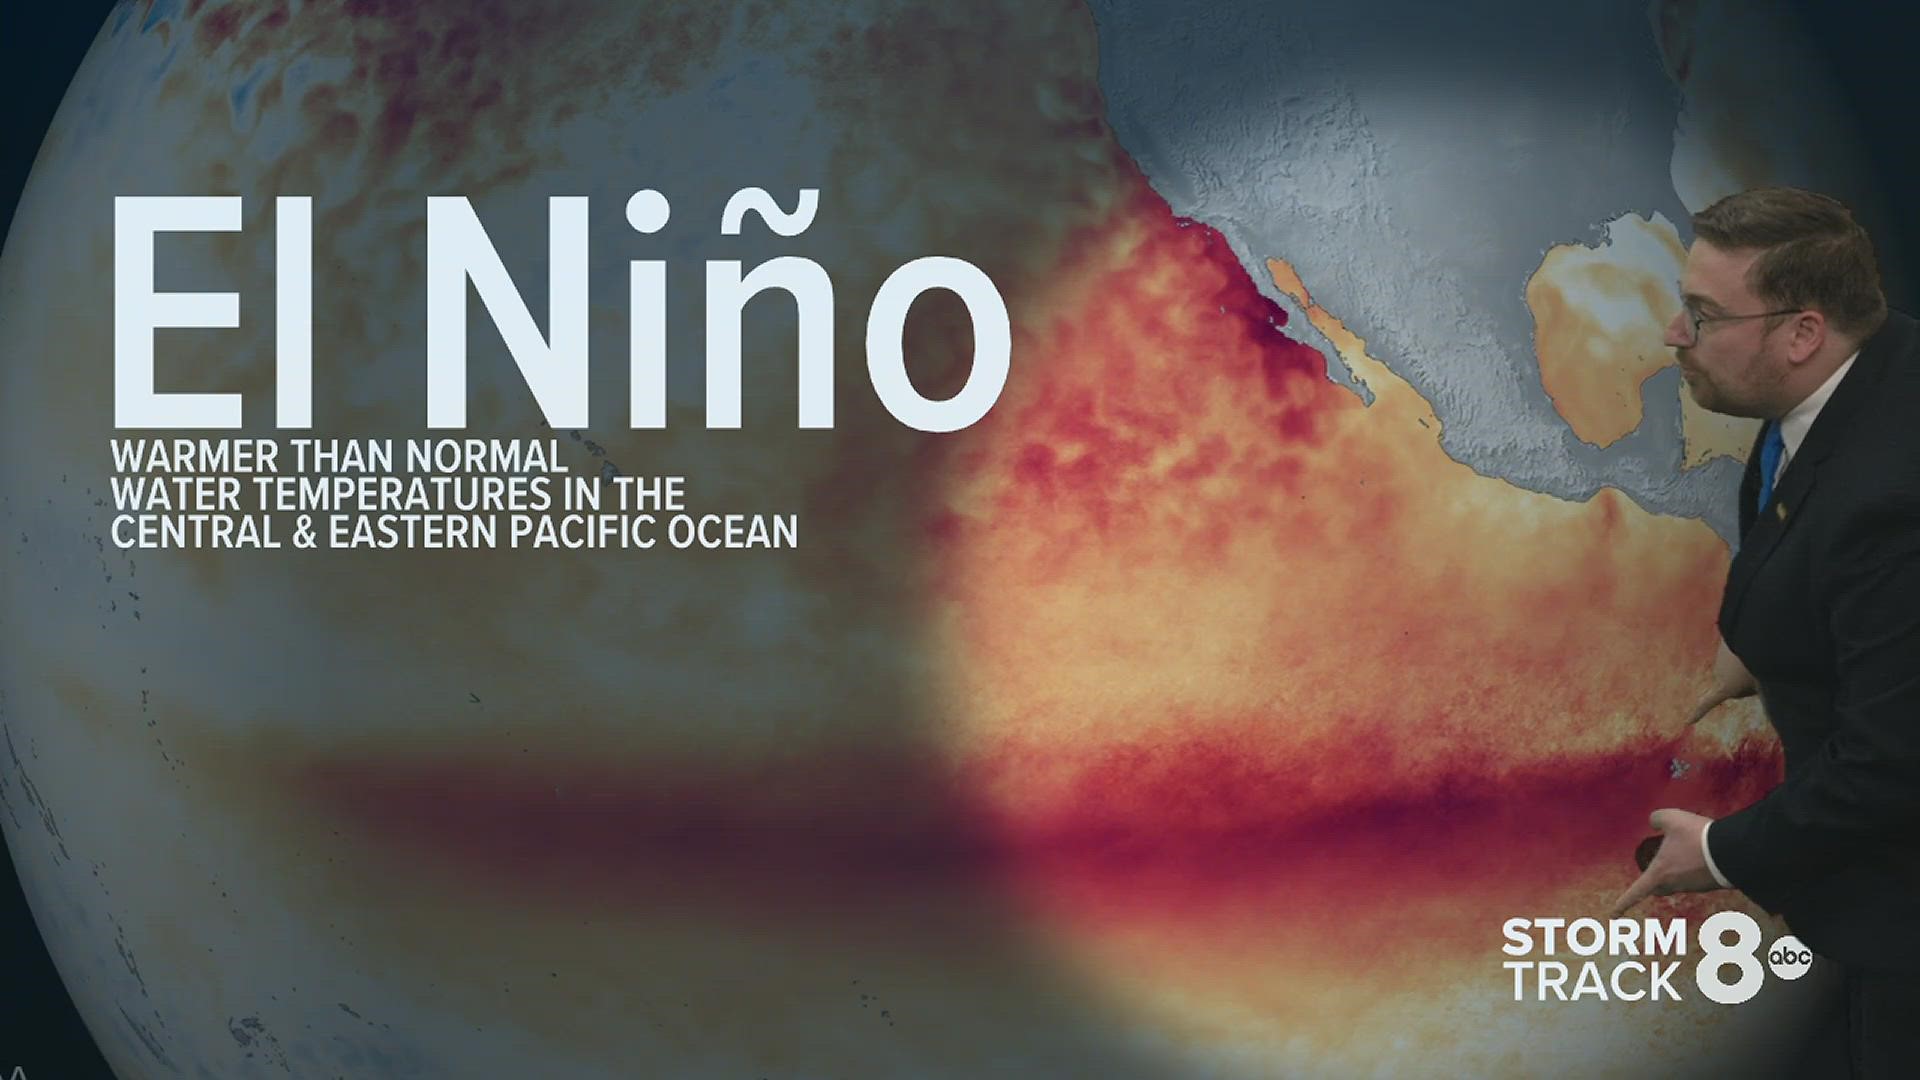 Our current La Niña pattern is expected to transition to an El Niño pattern by the end of 2023.